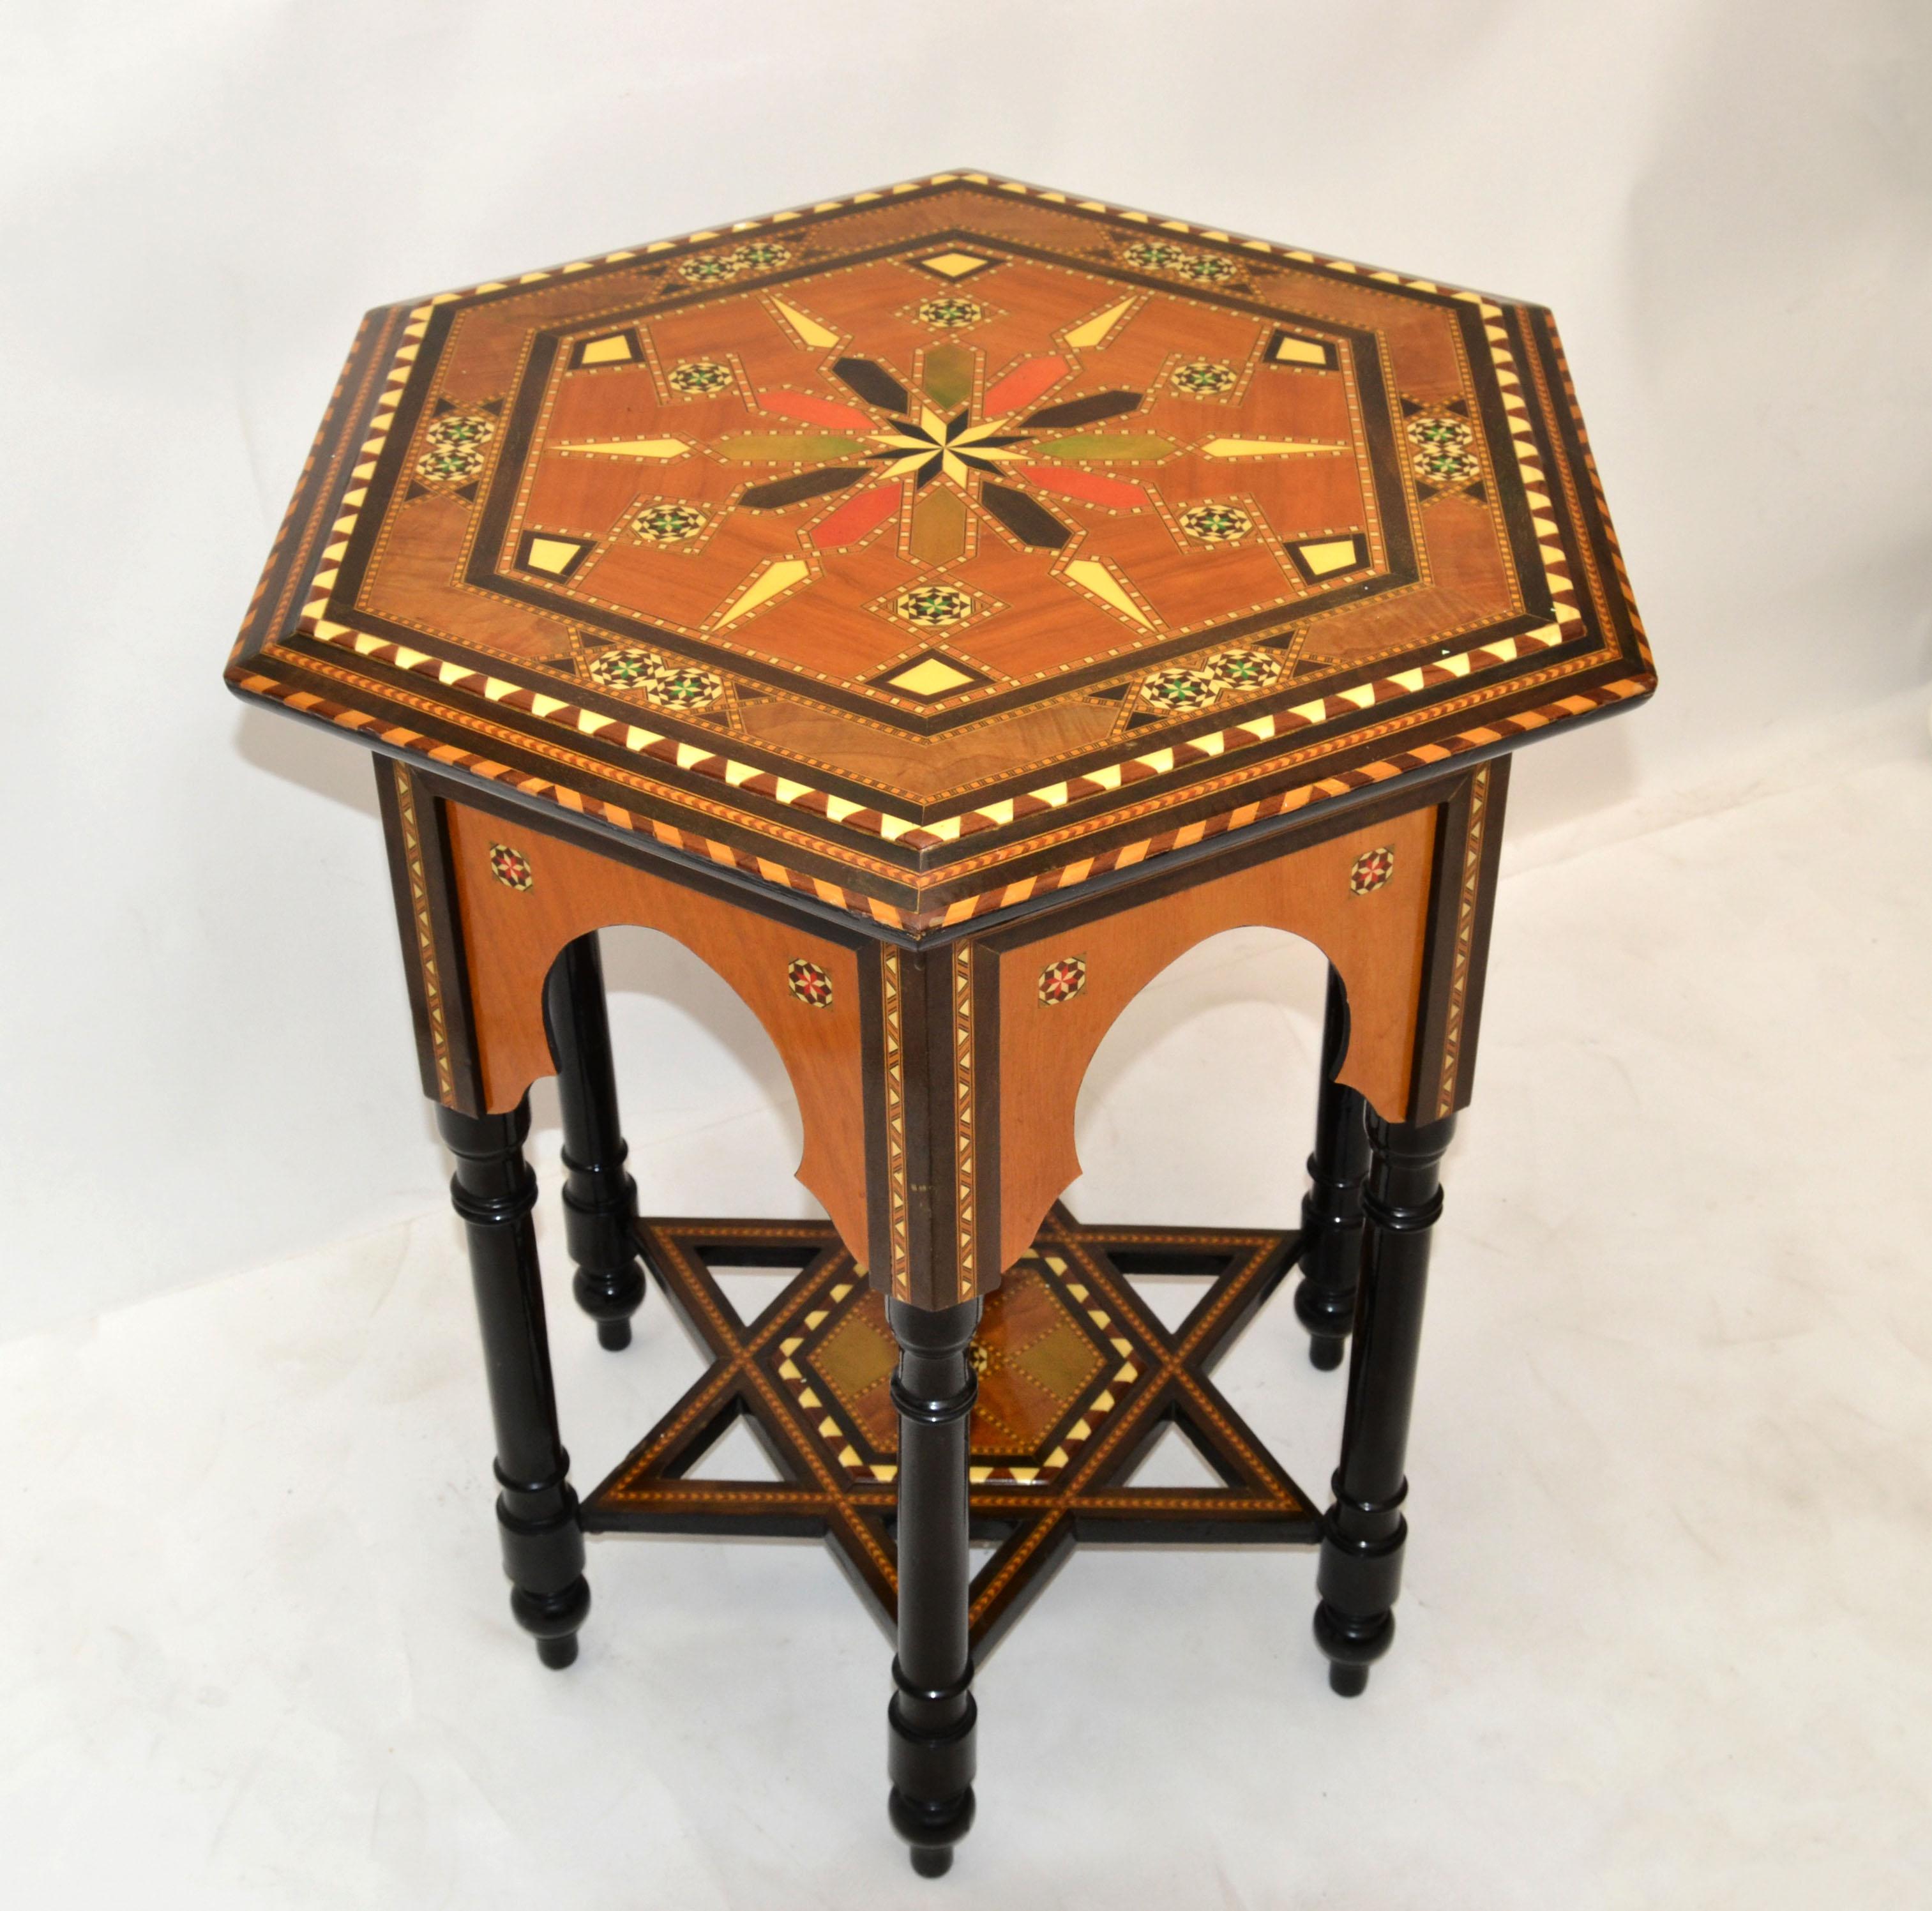 Hexagonal Wood Marquetry Moroccan Handmade Center Table Fruitwood Midcentury For Sale 3